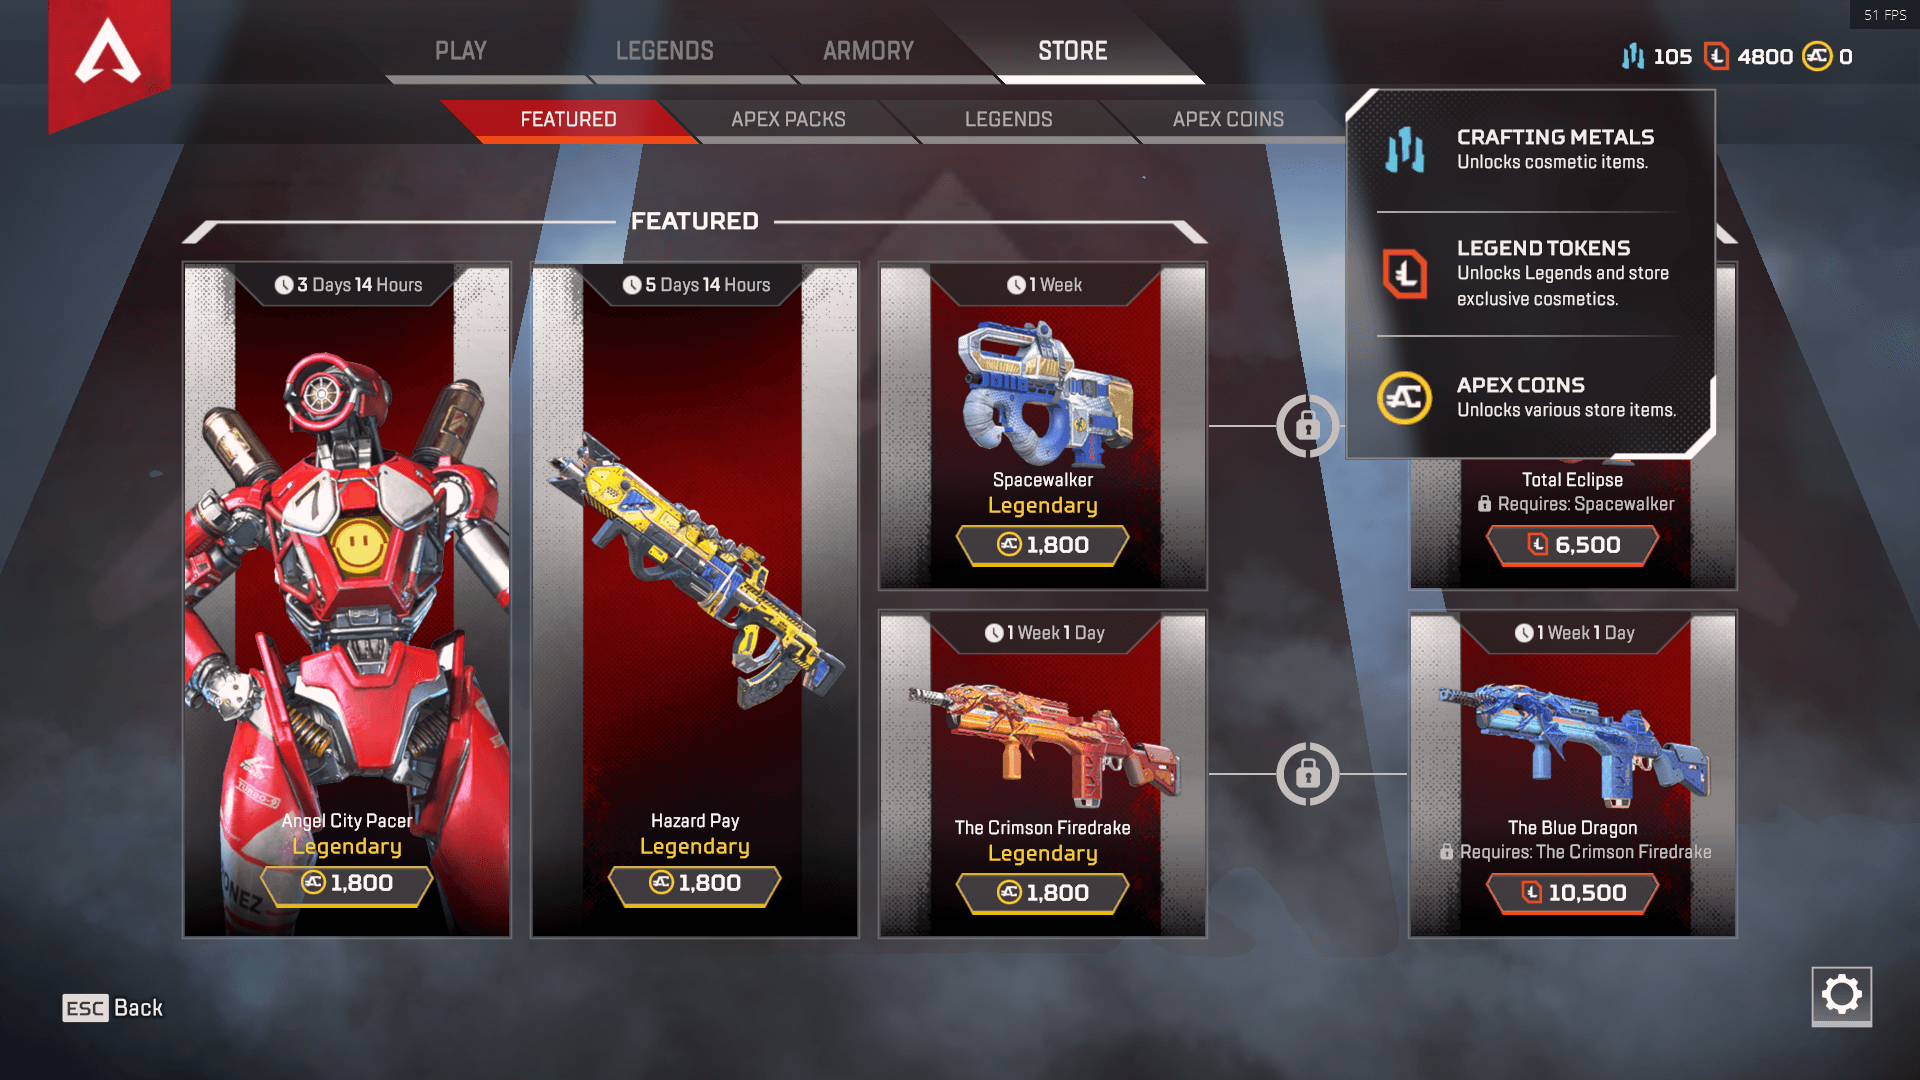 how microtransactions work in apex legends - microtransactions in fortnite